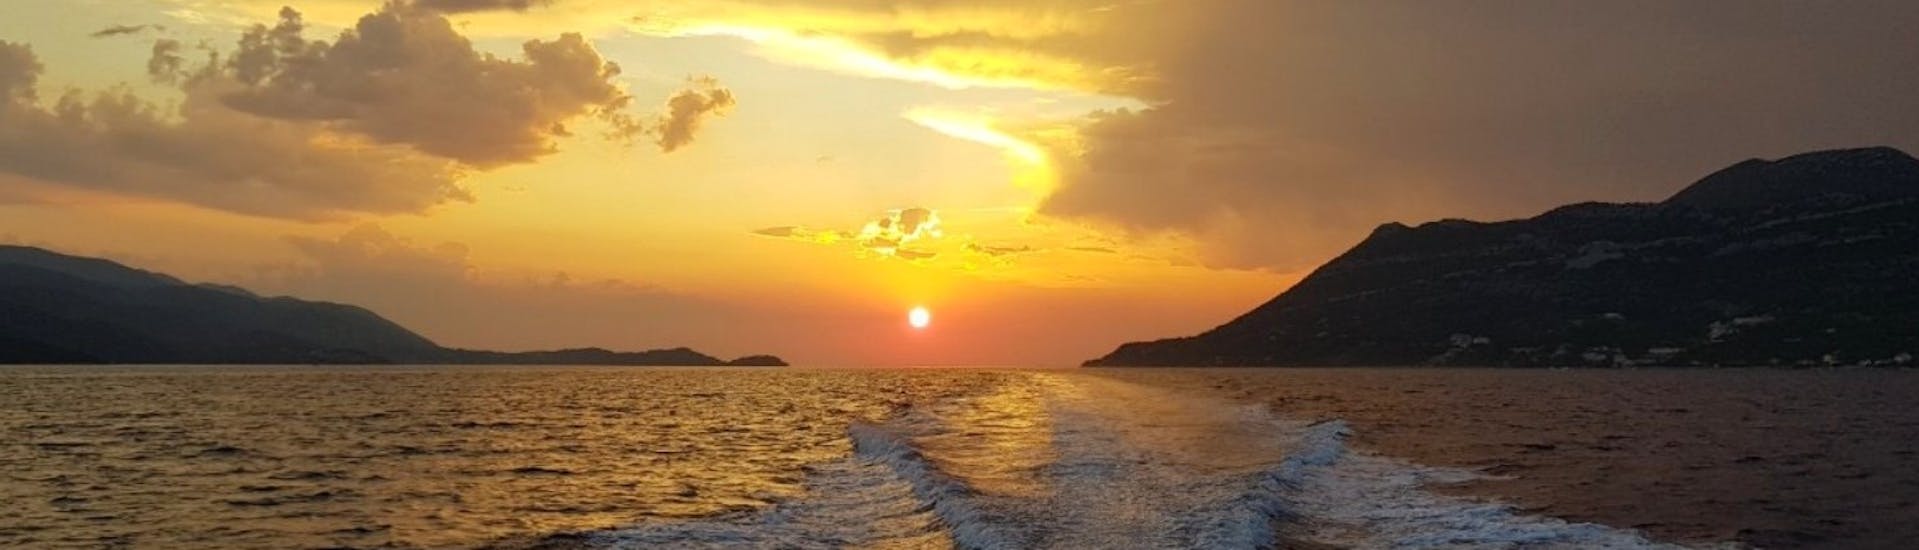 Sundown during the private sunset cruise from Dubrovnik to Daska Island hosted by Snooky Tours Dubrovnik.